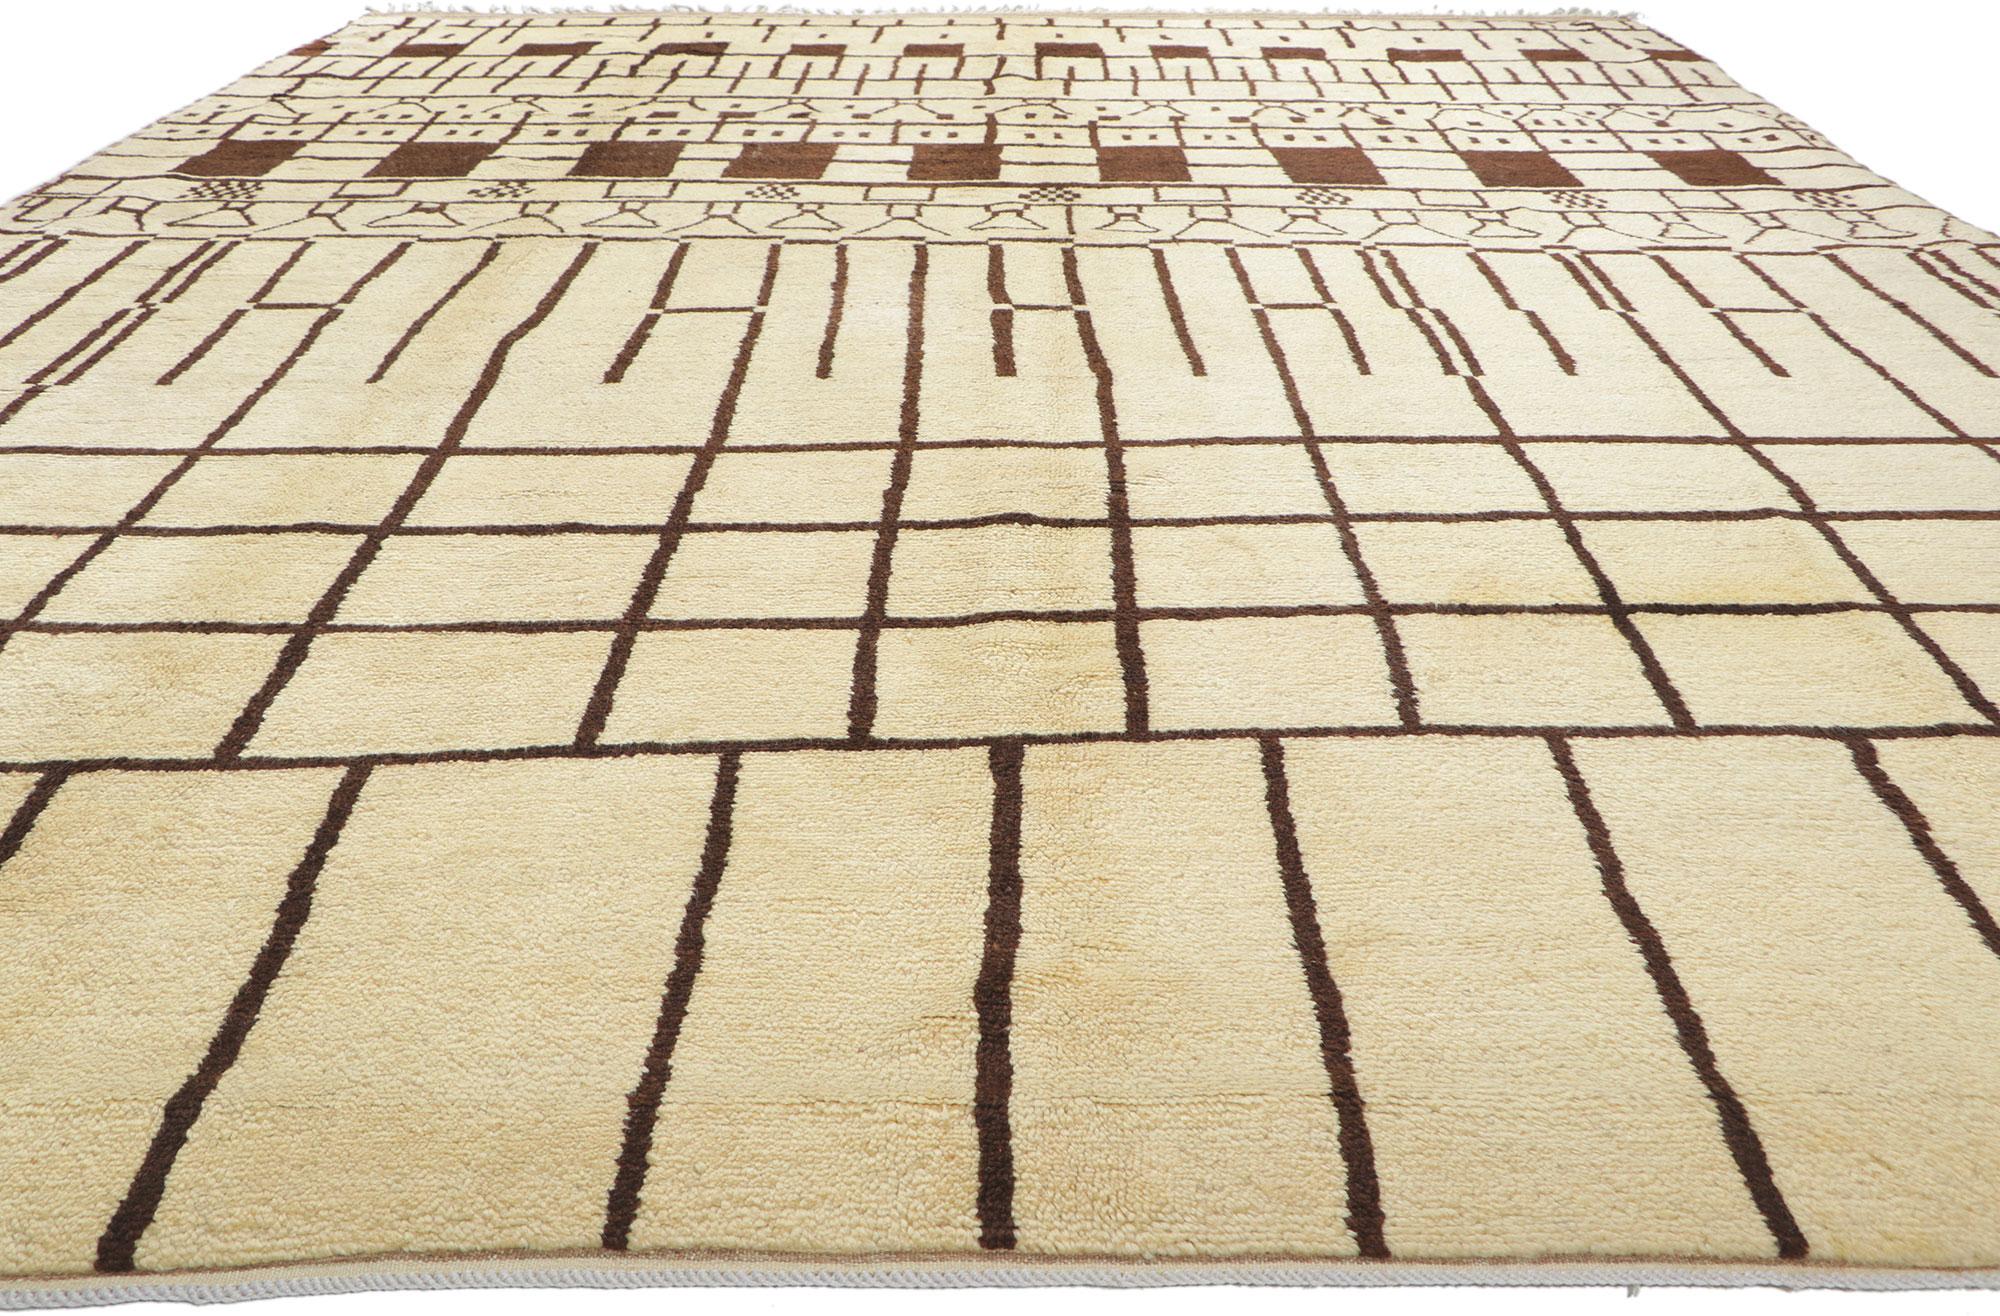 Large Authentic Berber Moroccan Rug with Neutral Earth-Tone Colors For Sale 7